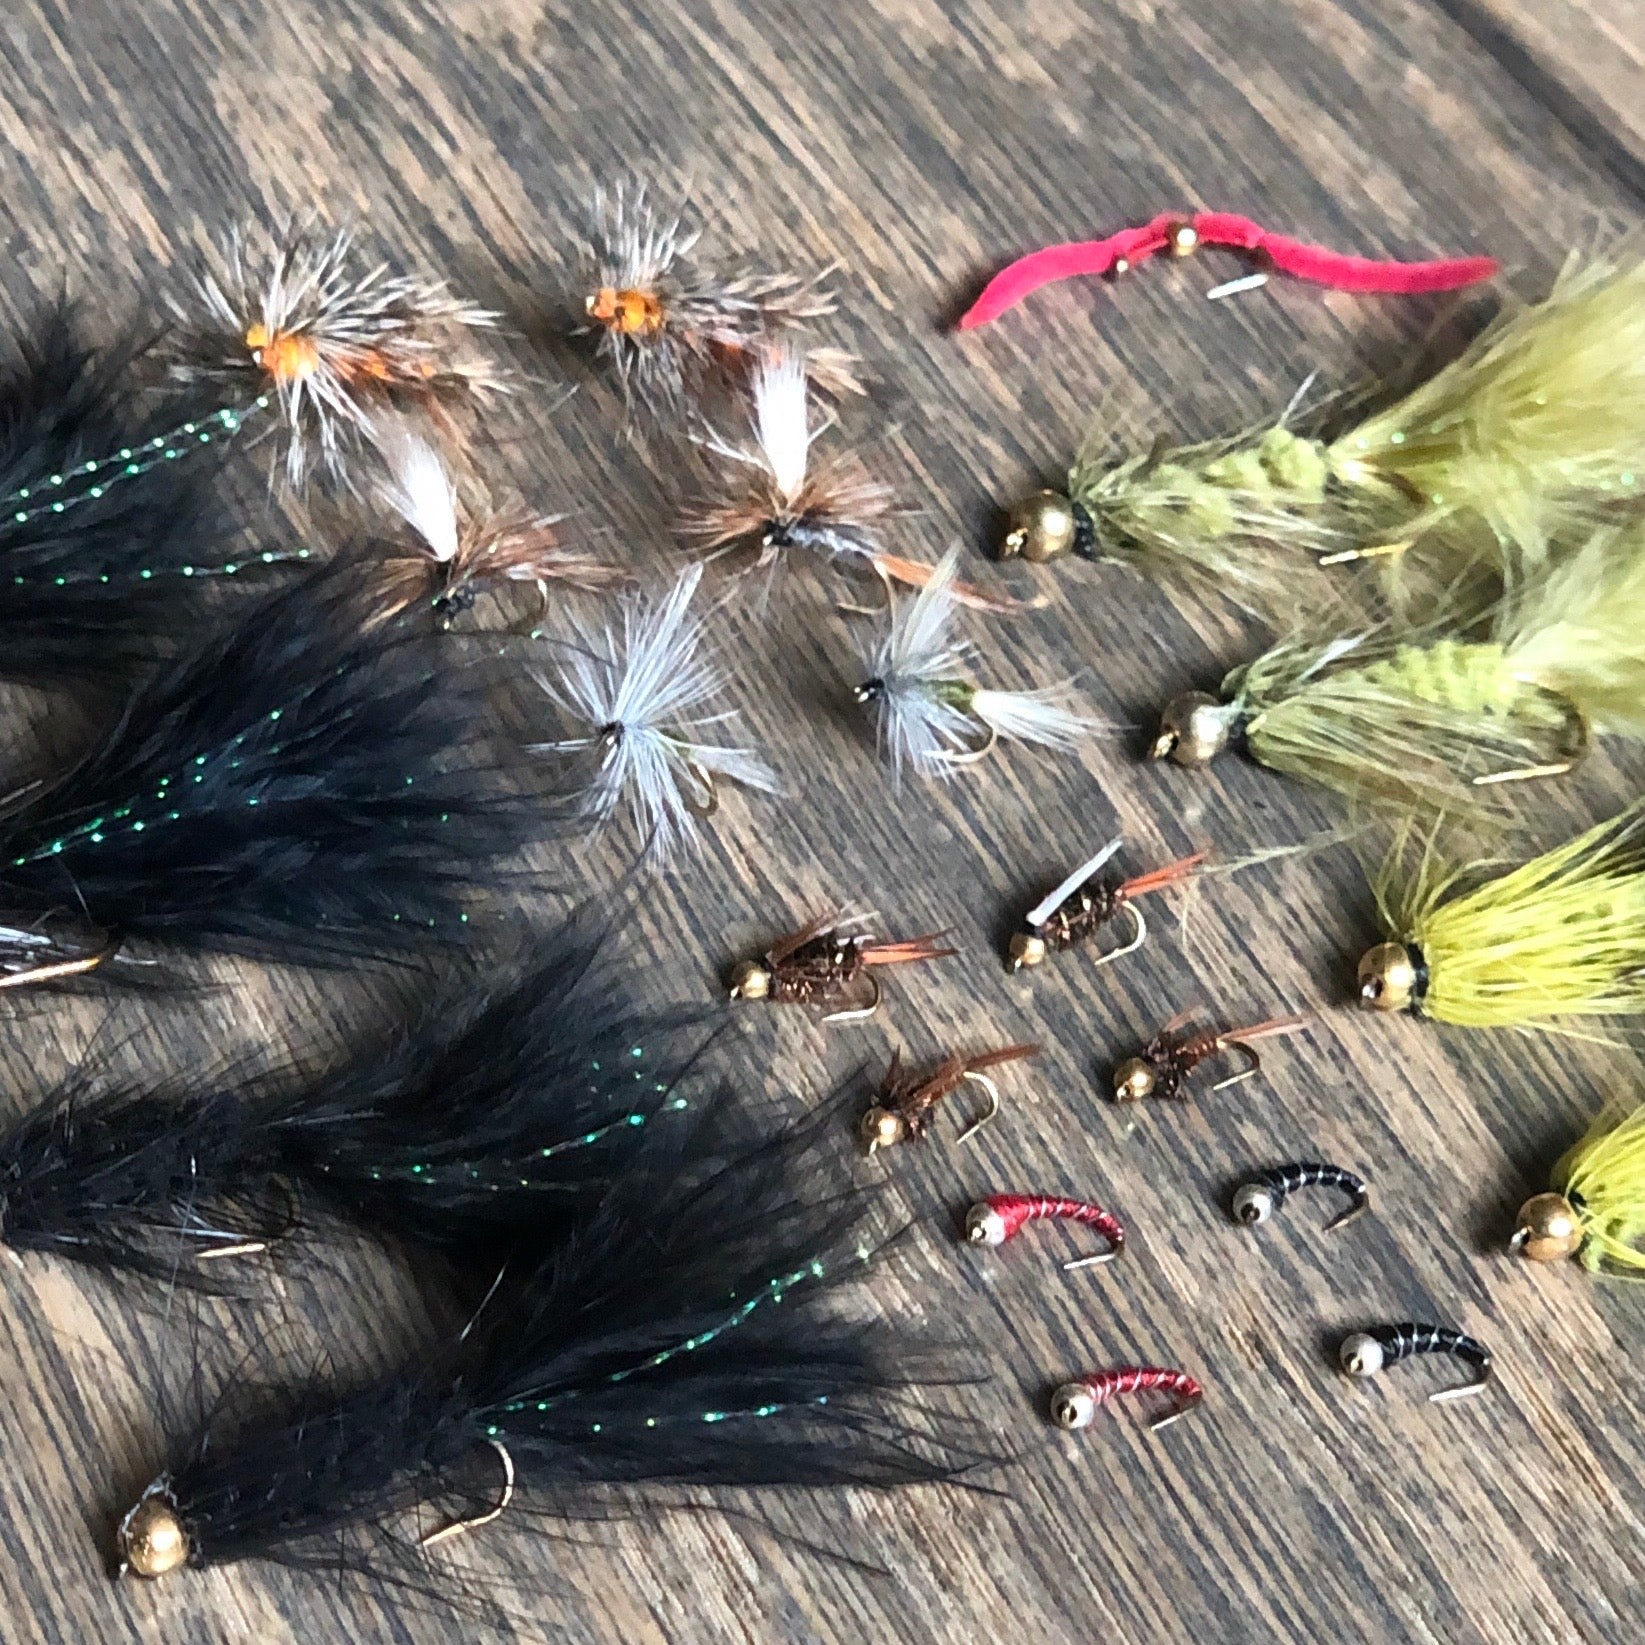 The Top 10 Flies Every Angler Should Have in Their Fly Box